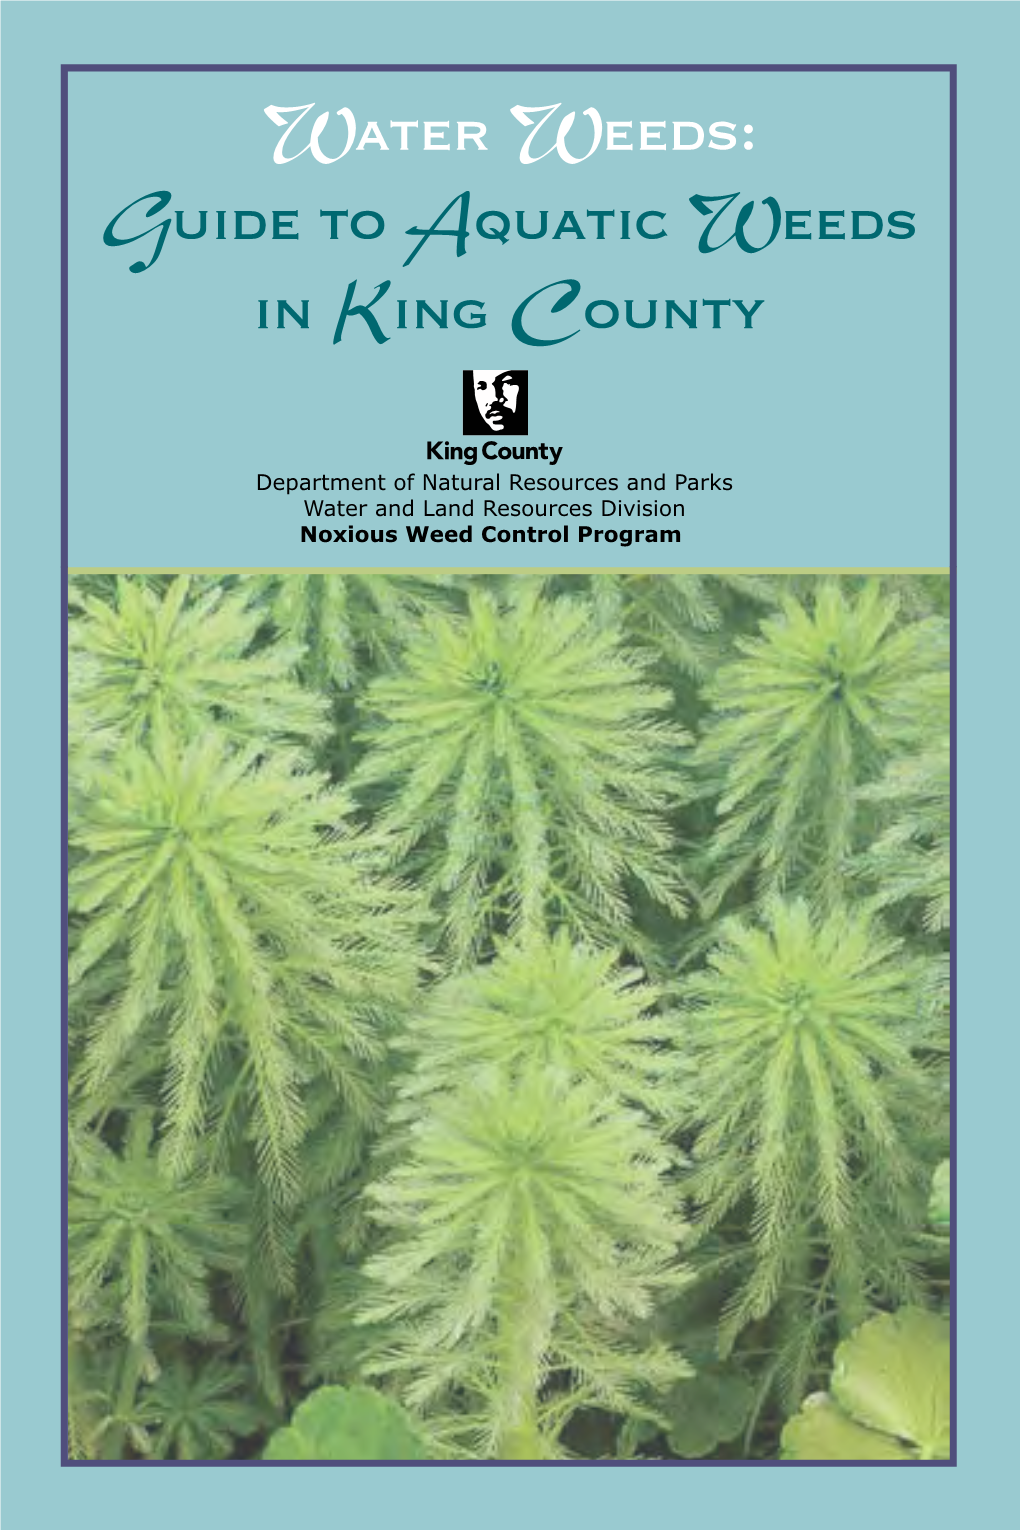 Water Weeds: Guide to Aquatic Weeds in King County